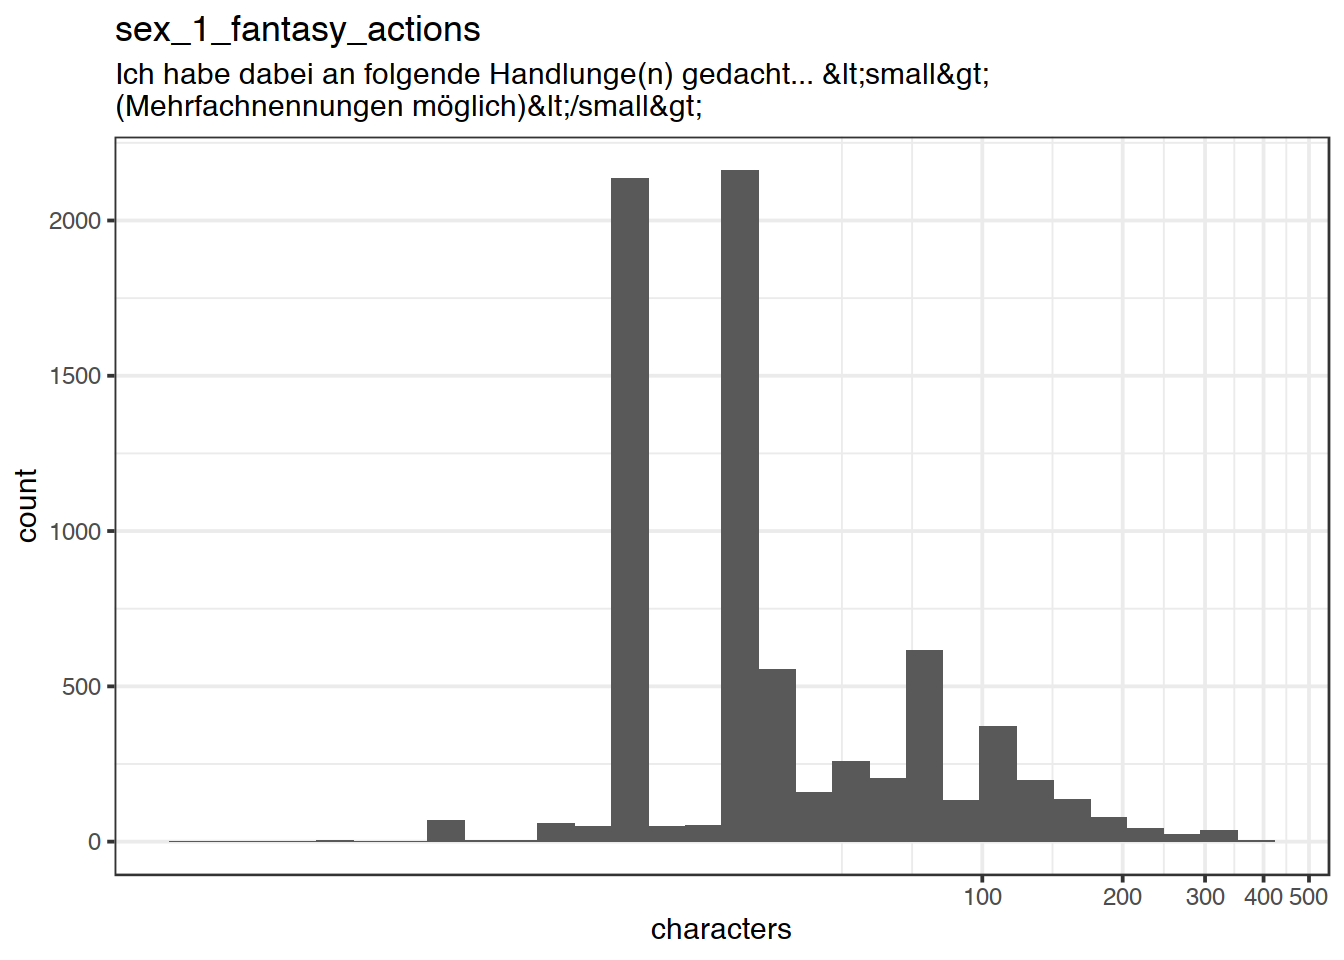 Distribution of values for sex_1_fantasy_actions